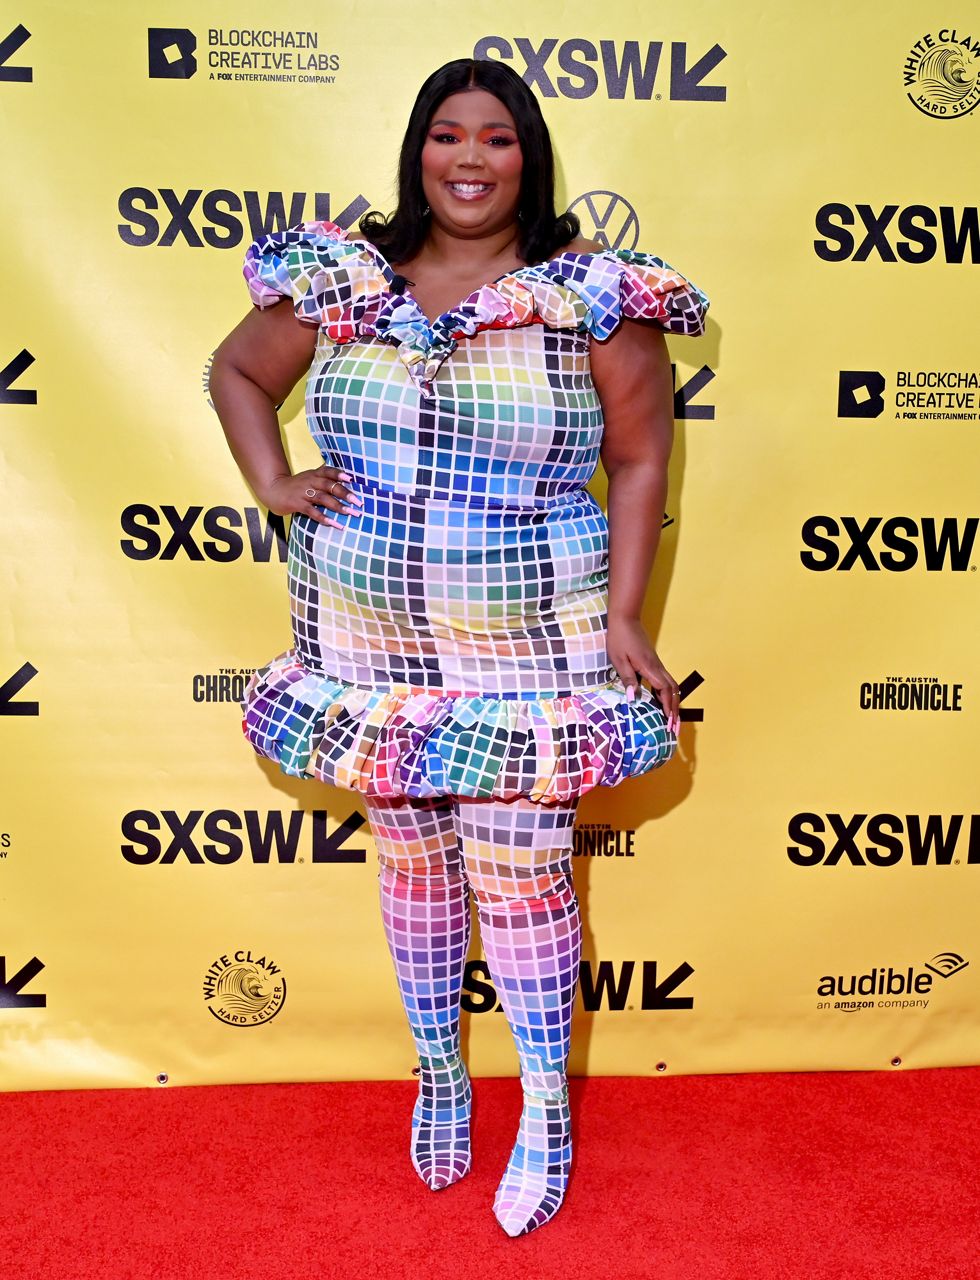 Lizzo on The Special Tour Outfits, Creativity, and Wardrobe Malfunctions